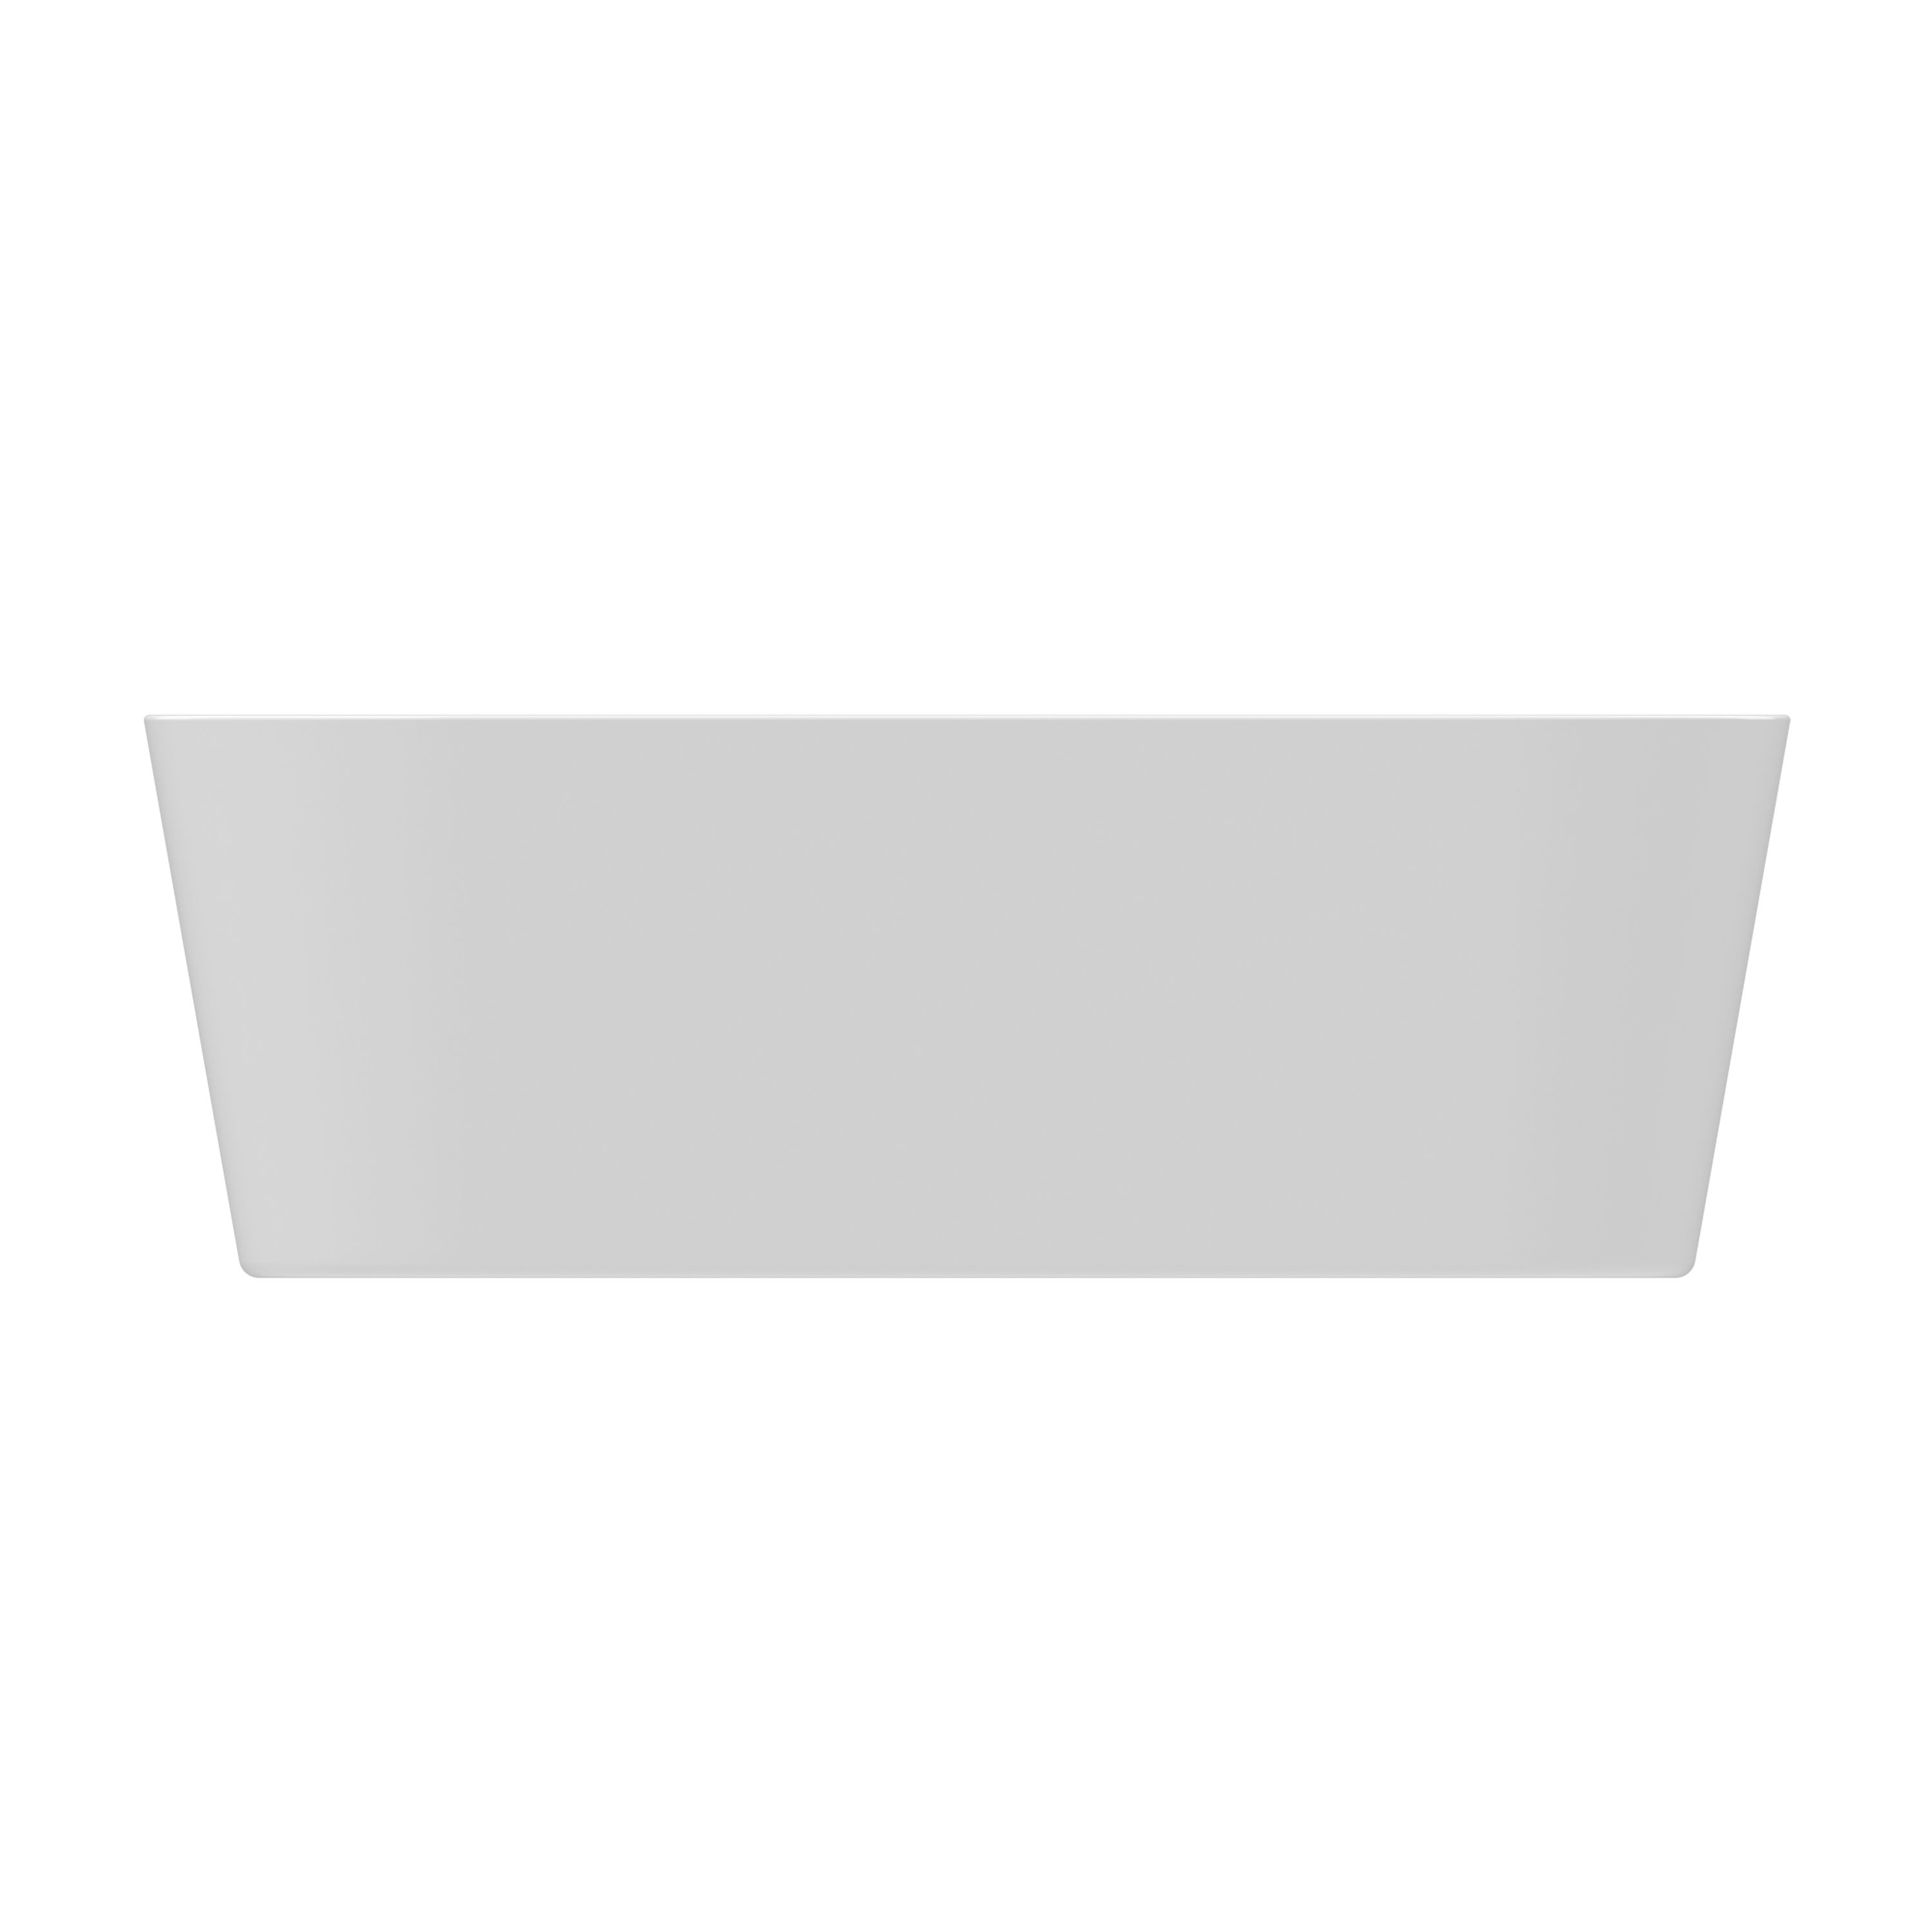 GoodHome Gloss White Back to wall Acrylic D-shaped Double ended Bath (L)1600mm (W)750mm